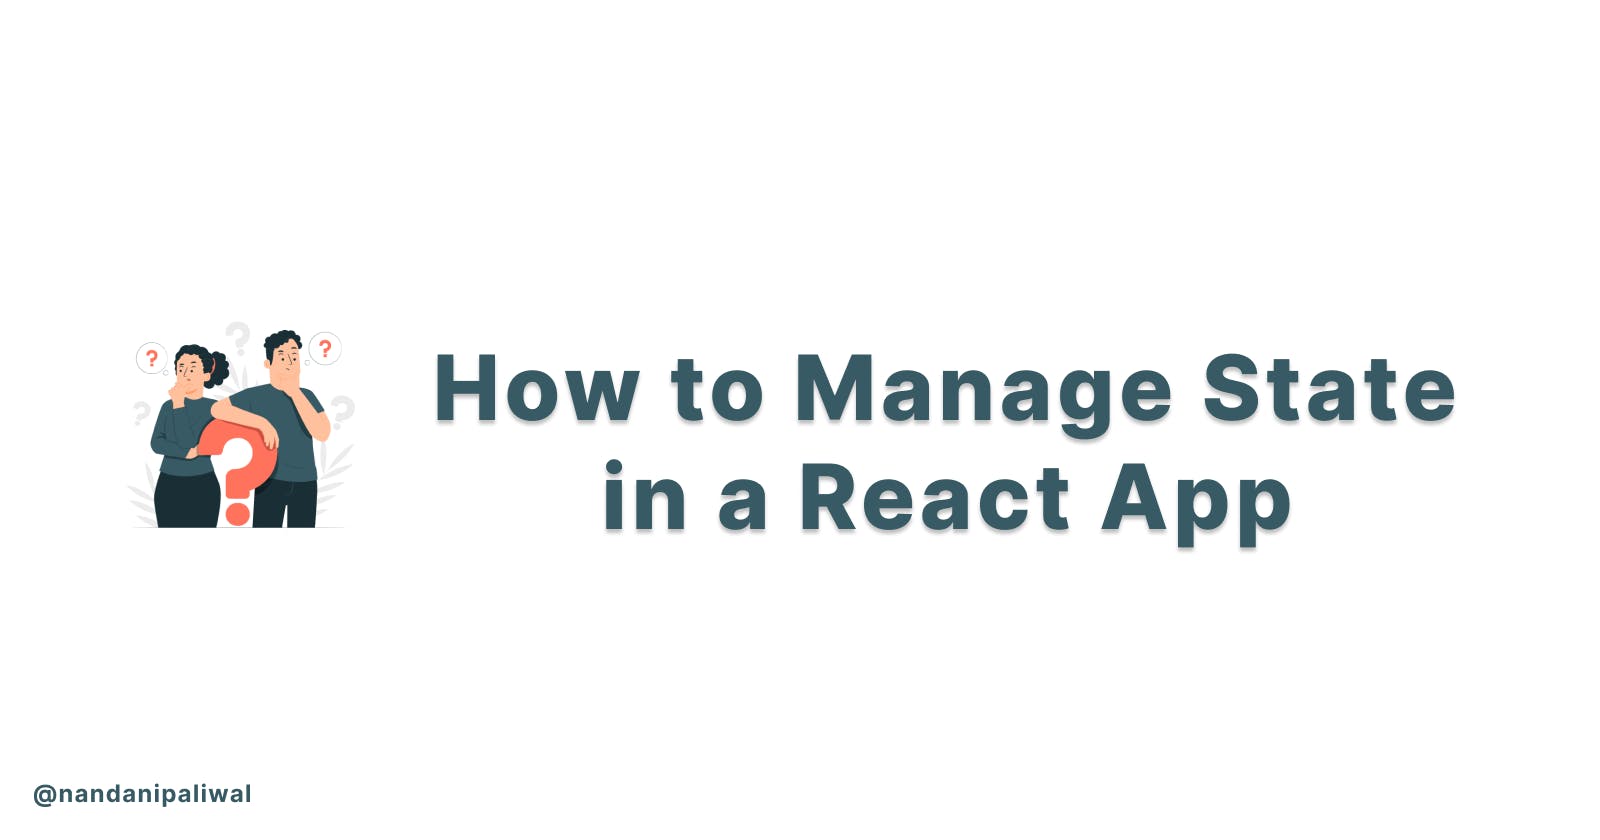 How to Manage State in a React App